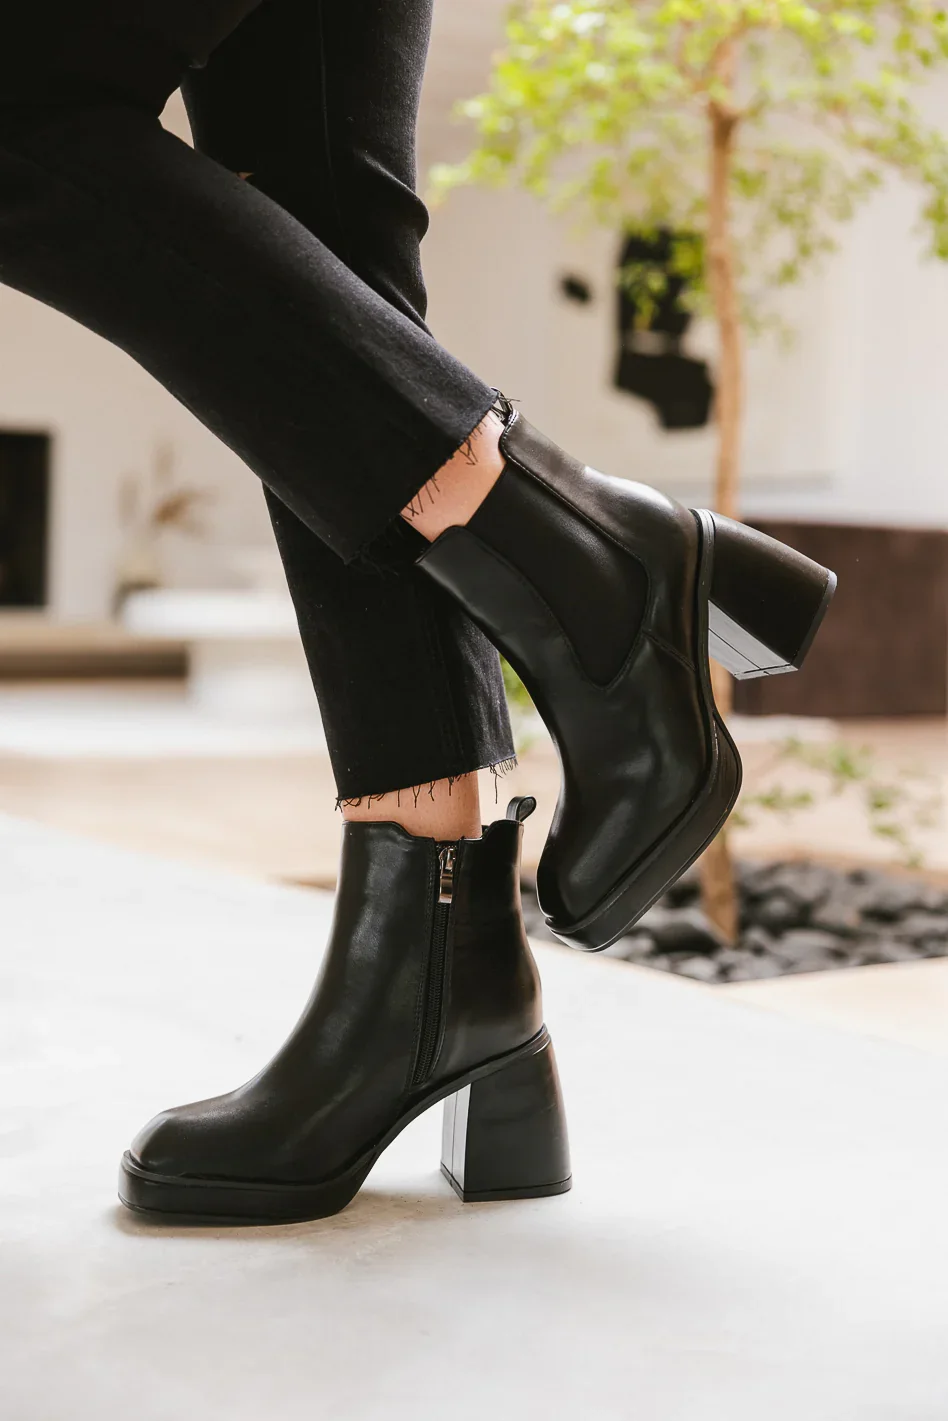 Image of Fallon Heeled Boots in Black - FINAL SALE